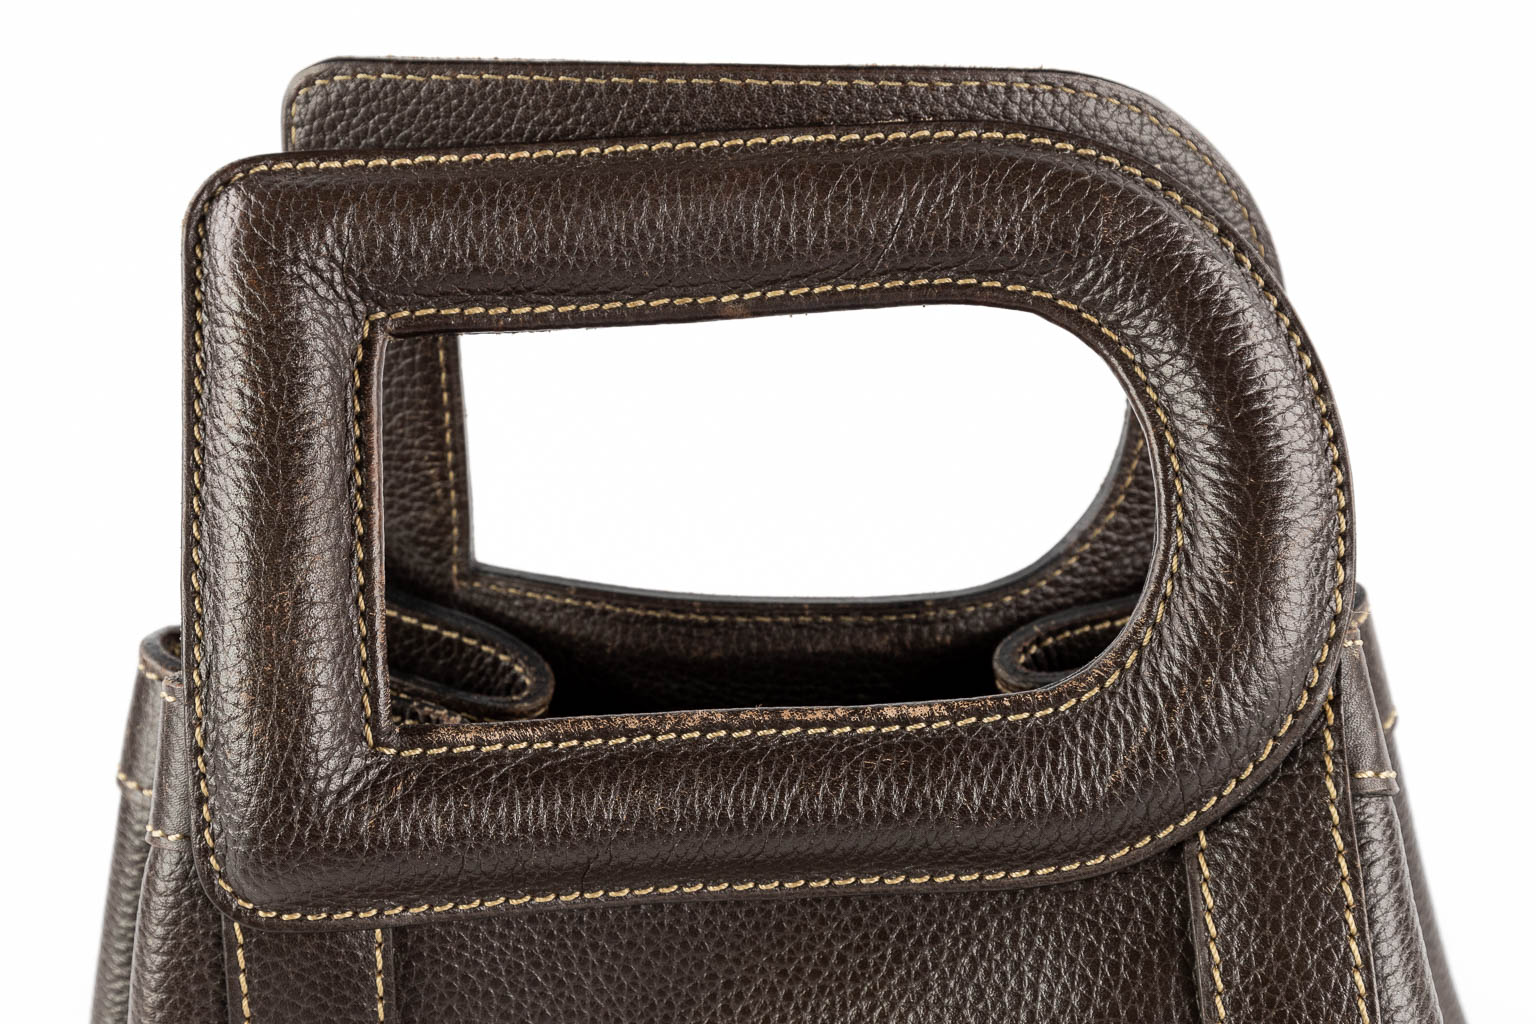 Delvaux Punch, a handbag made of brown leather. (W:30 x H:38 x D:17 cm)